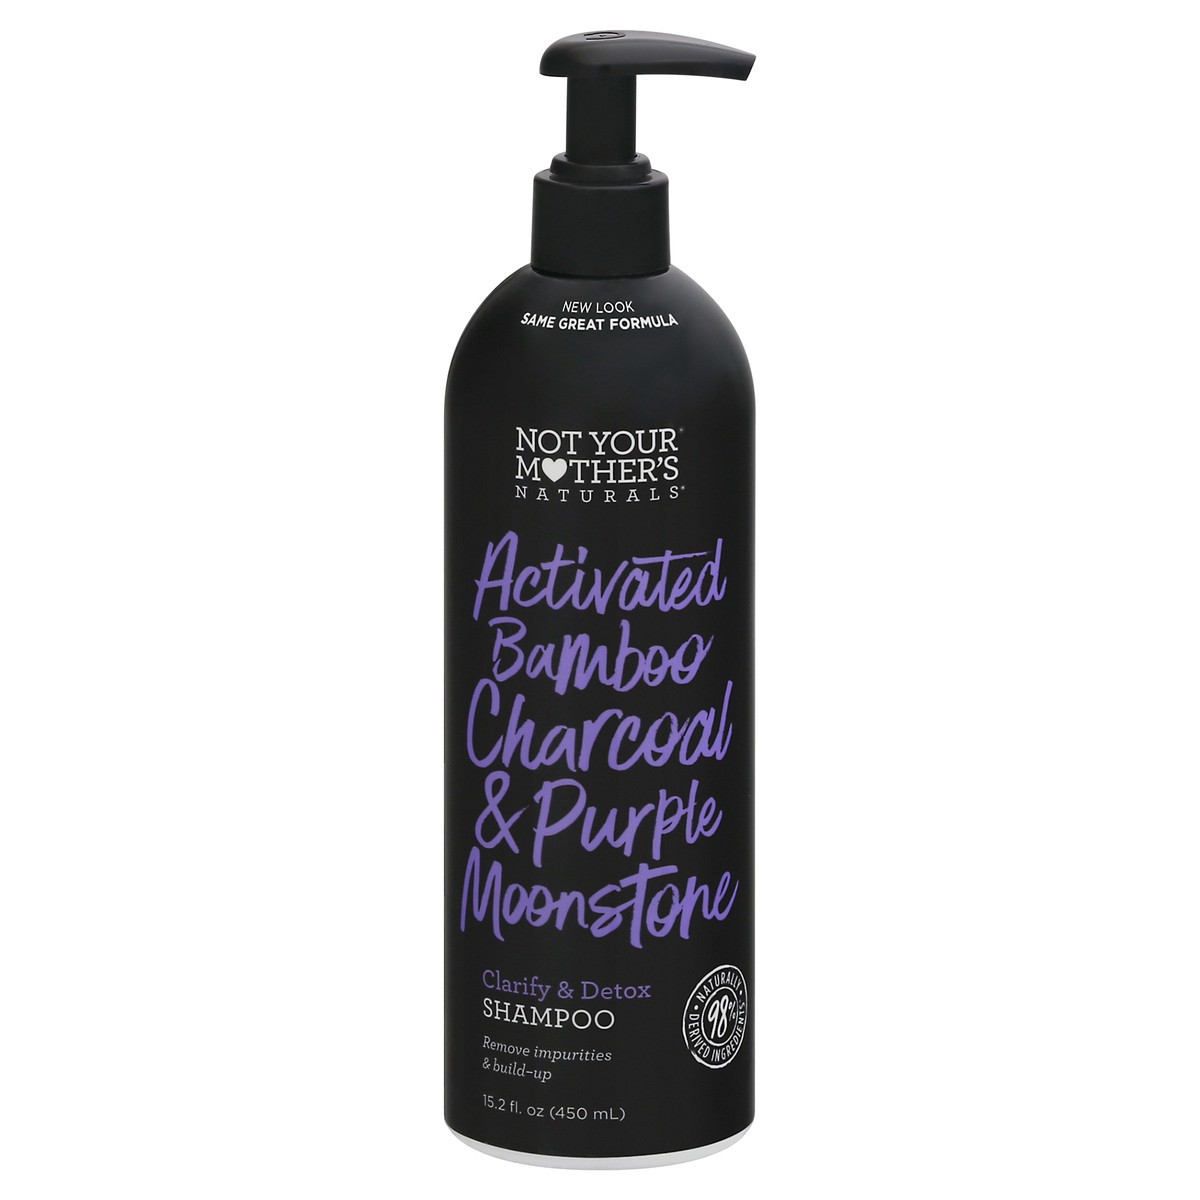 slide 2 of 12, Not Your Mother's Naturals Clarify & Detox Activated Bamboo Charcoal & Purple Moonstone Shampoo 15.2 fl oz Bottle, 15.20 fl oz